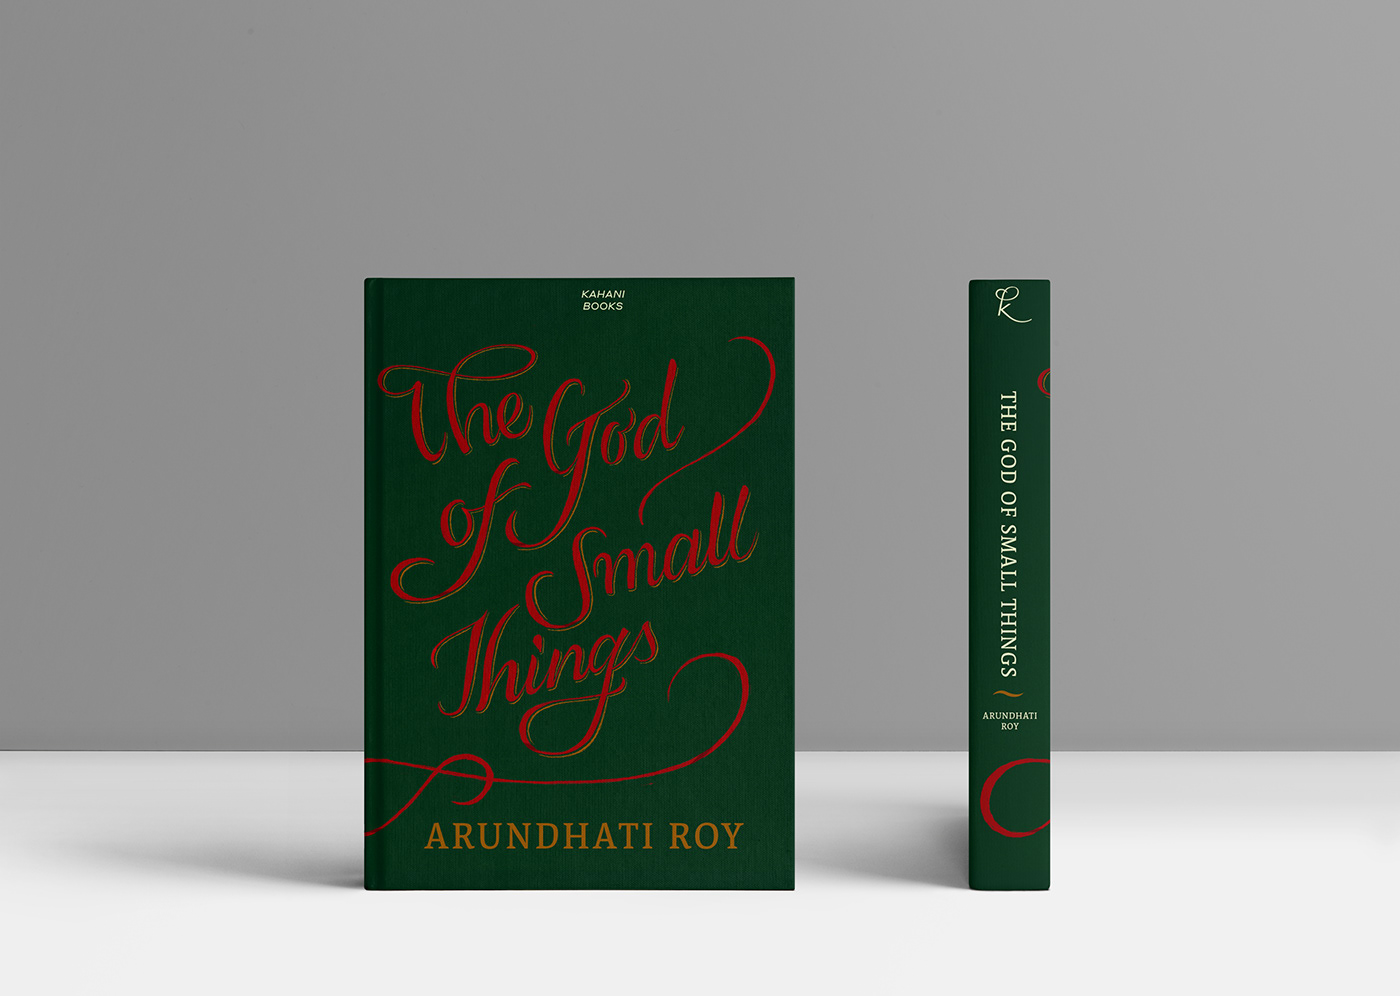 Book Cover Design publication house lettering book covers branding 